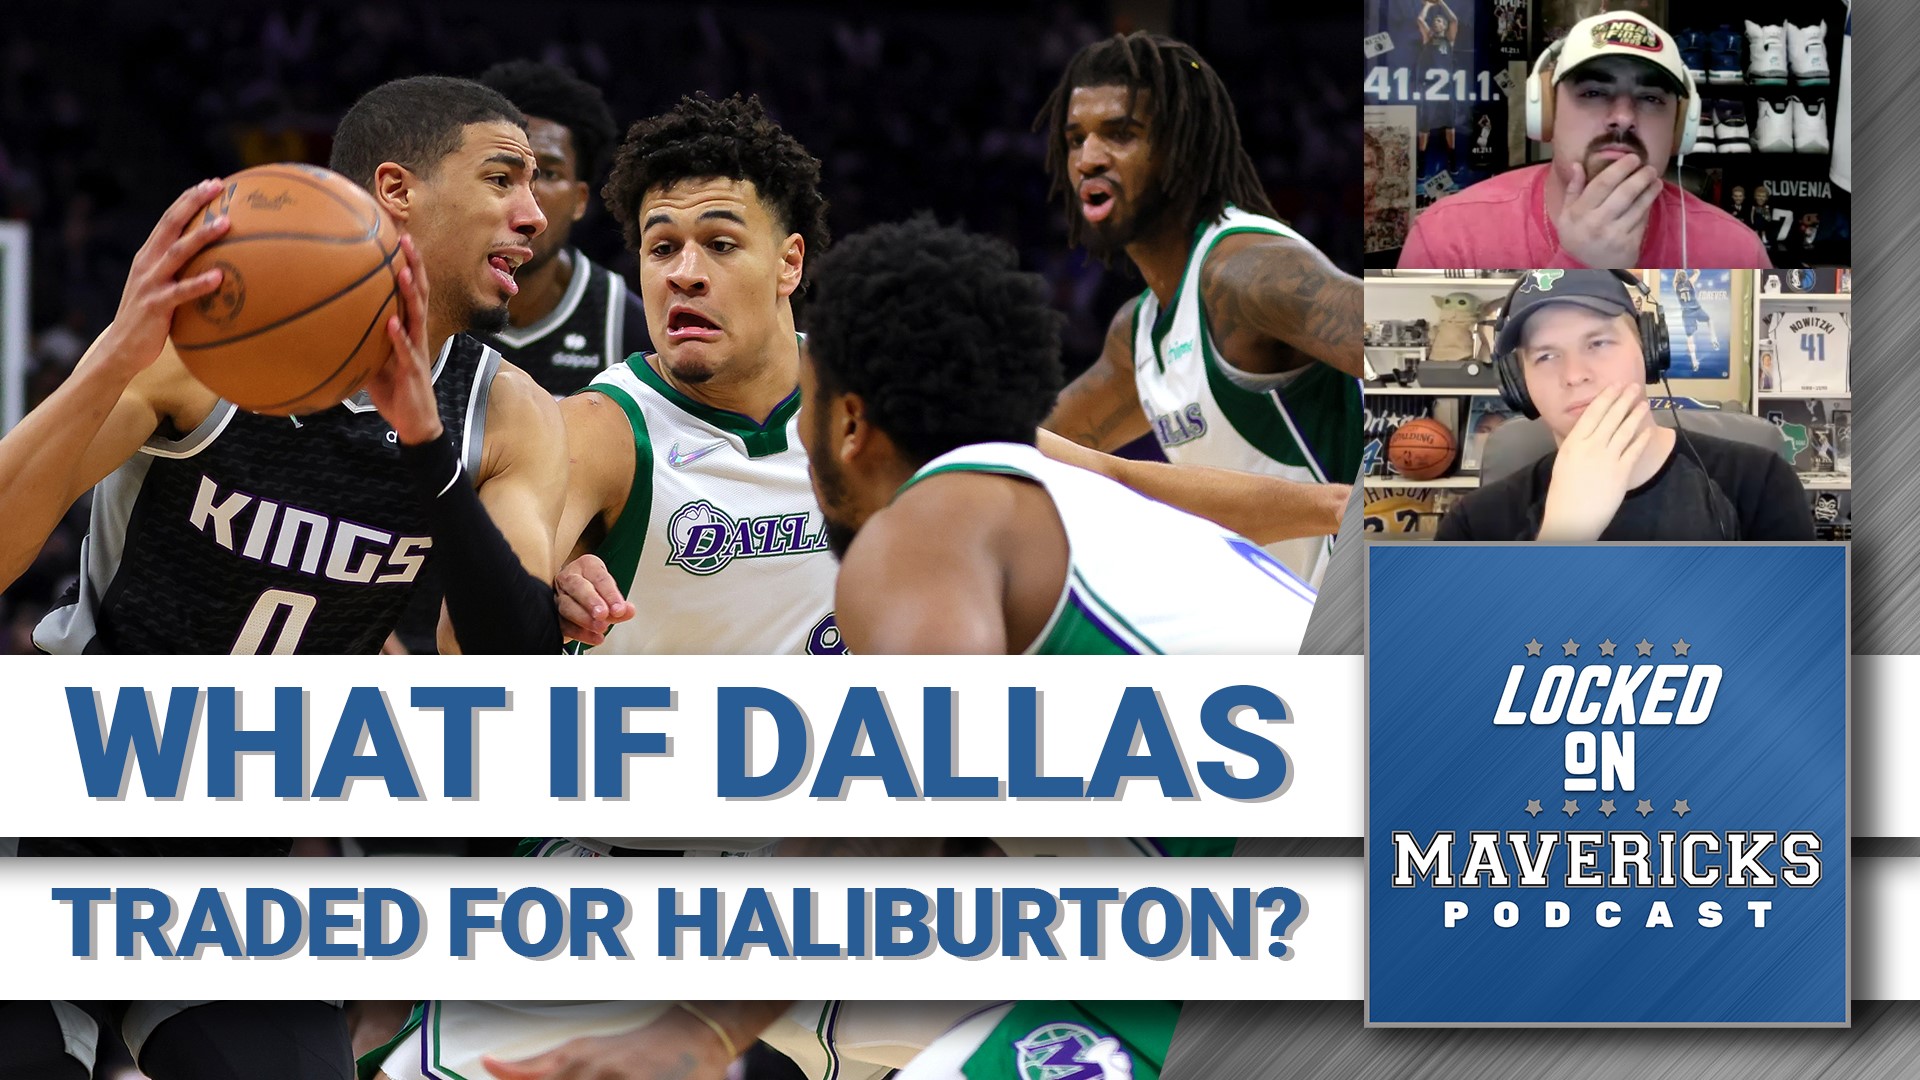 Nick Angstadt & Isaac Harris discuss the Mavs' rumored trade-up for Tyrese Haliburton and the ripple effects it would have had for the Mavs.